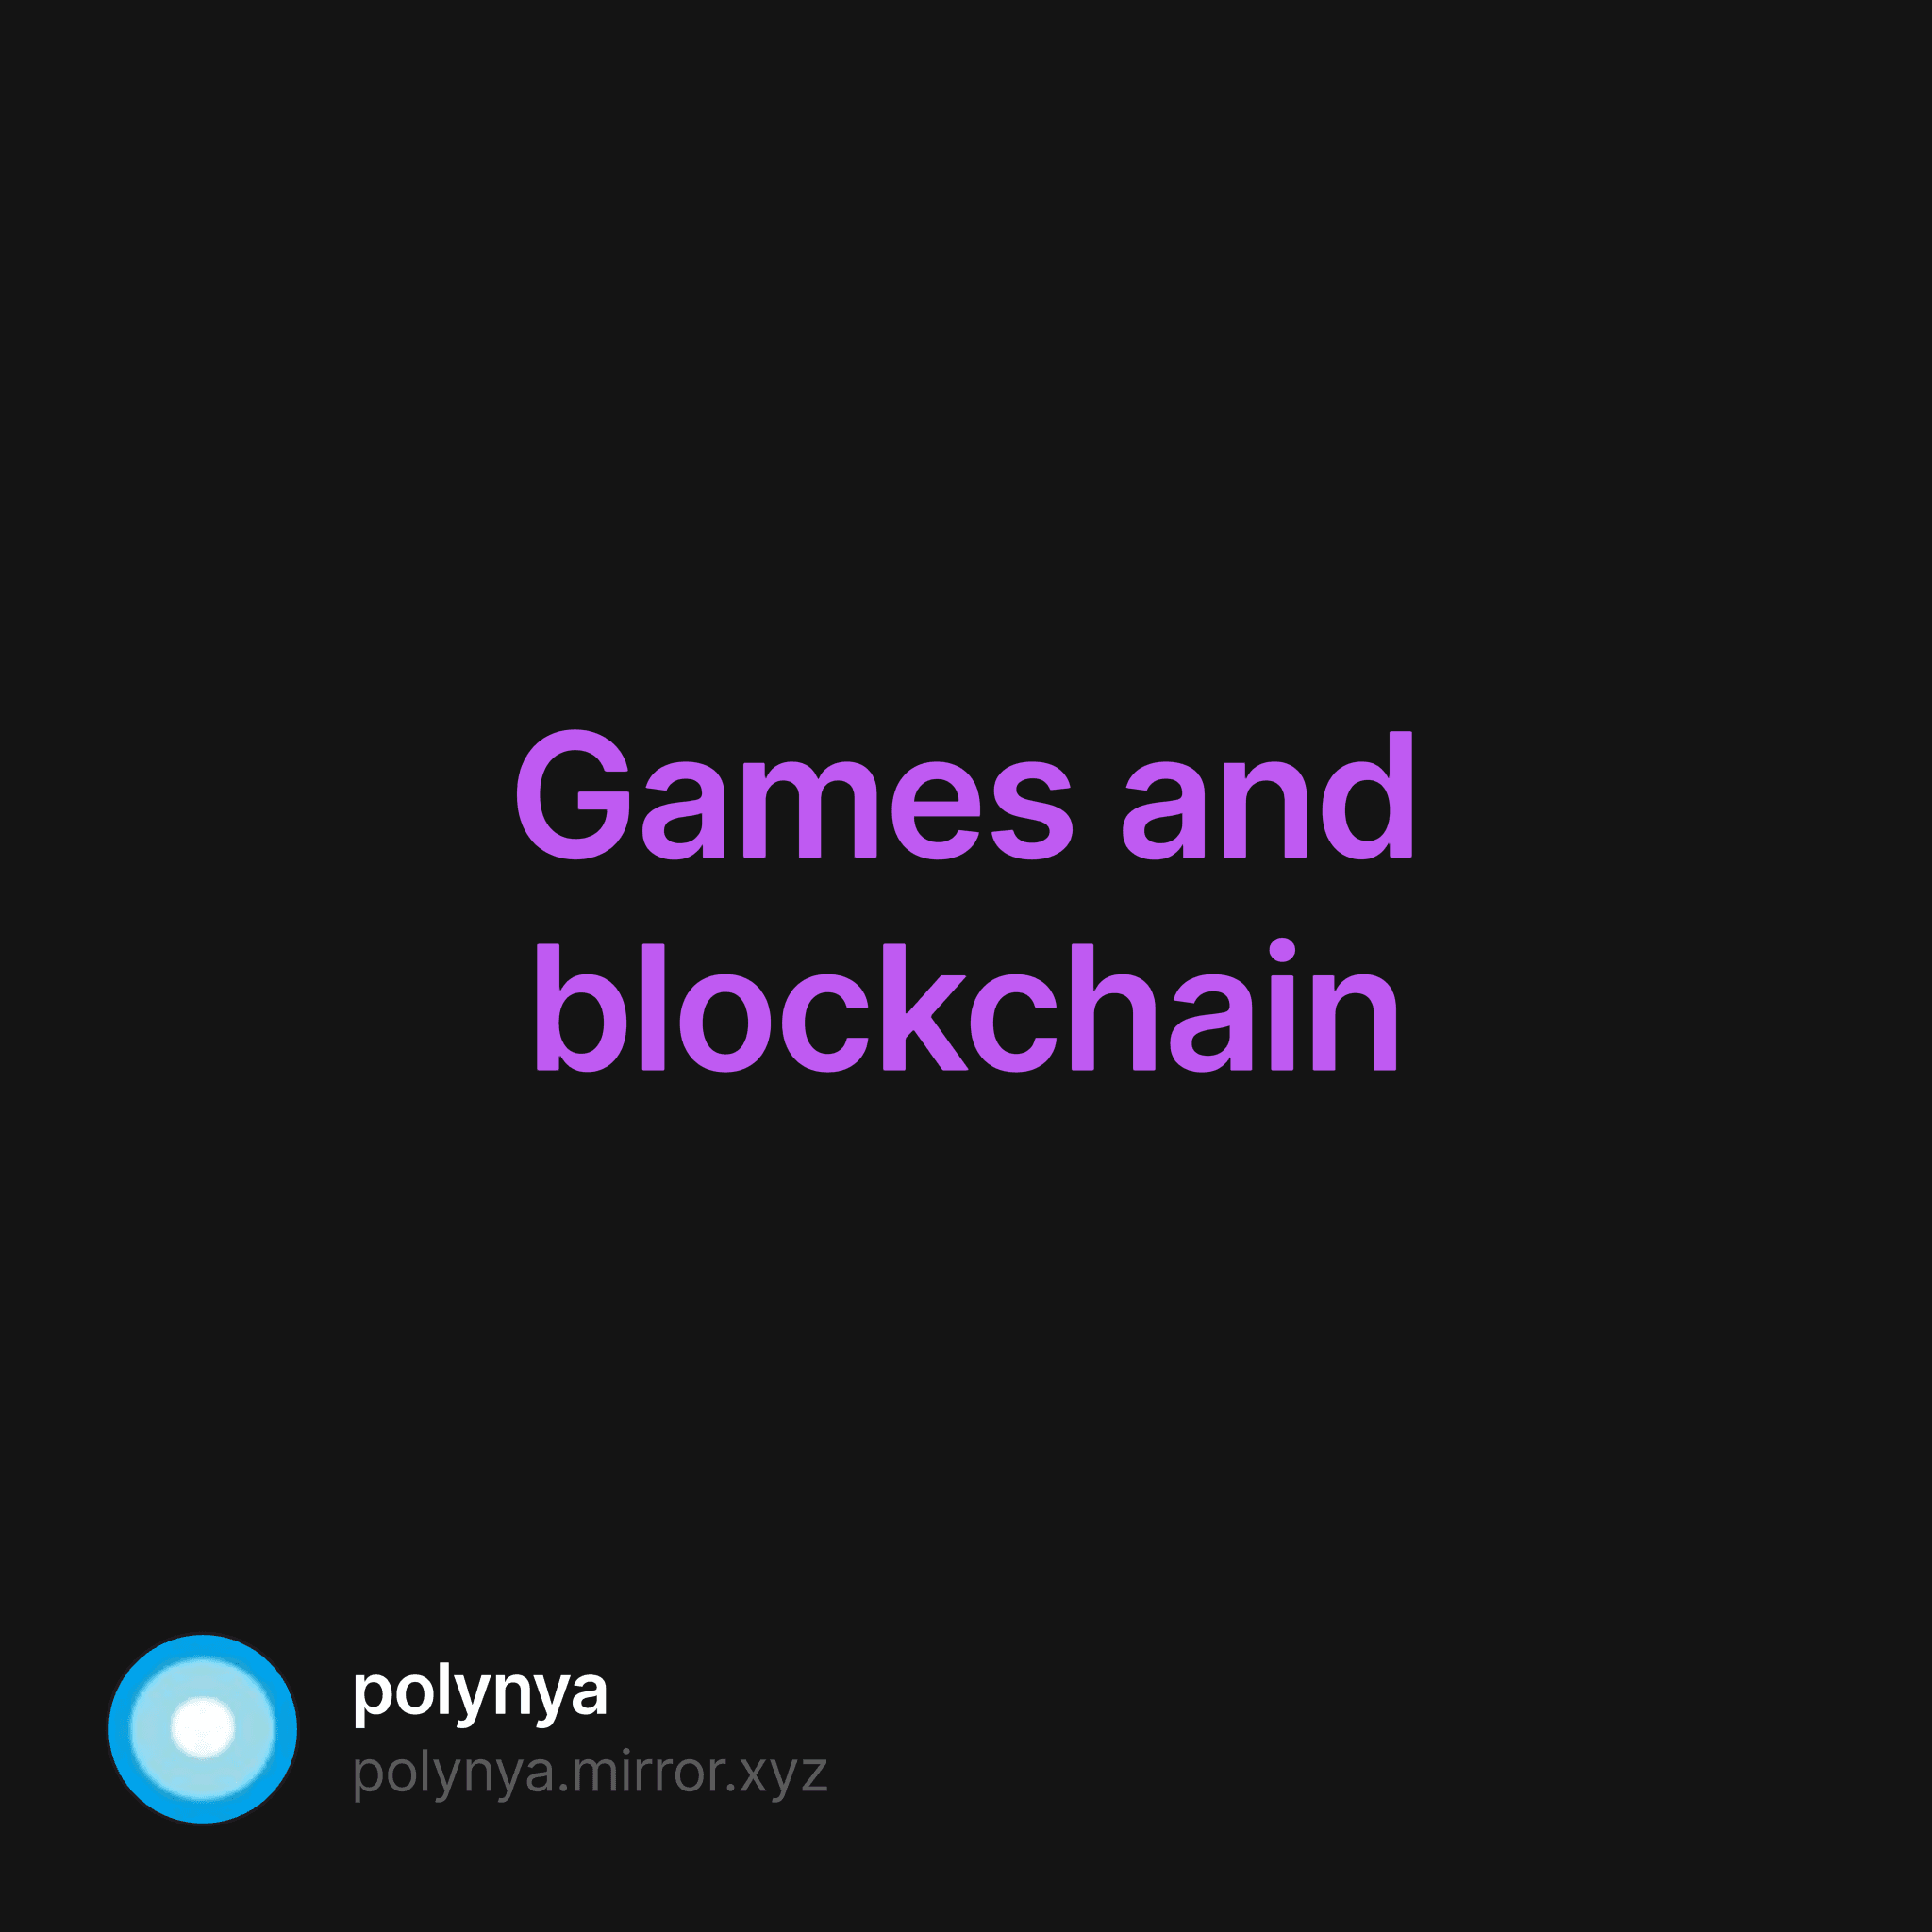 Games and blockchain 38/420